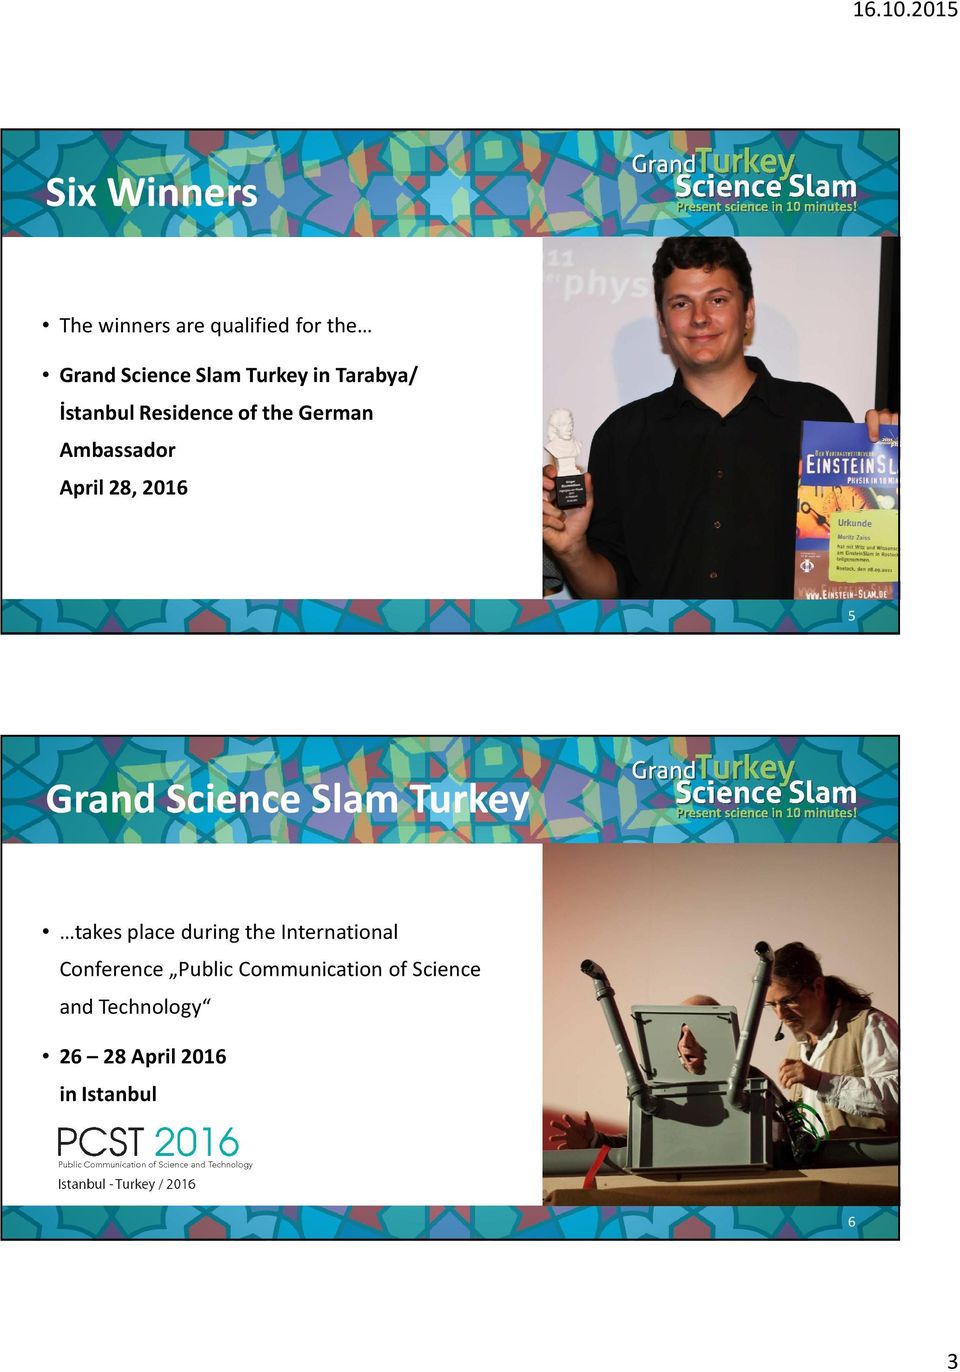 Grand Science Slam Turkey takes place during the International Conference